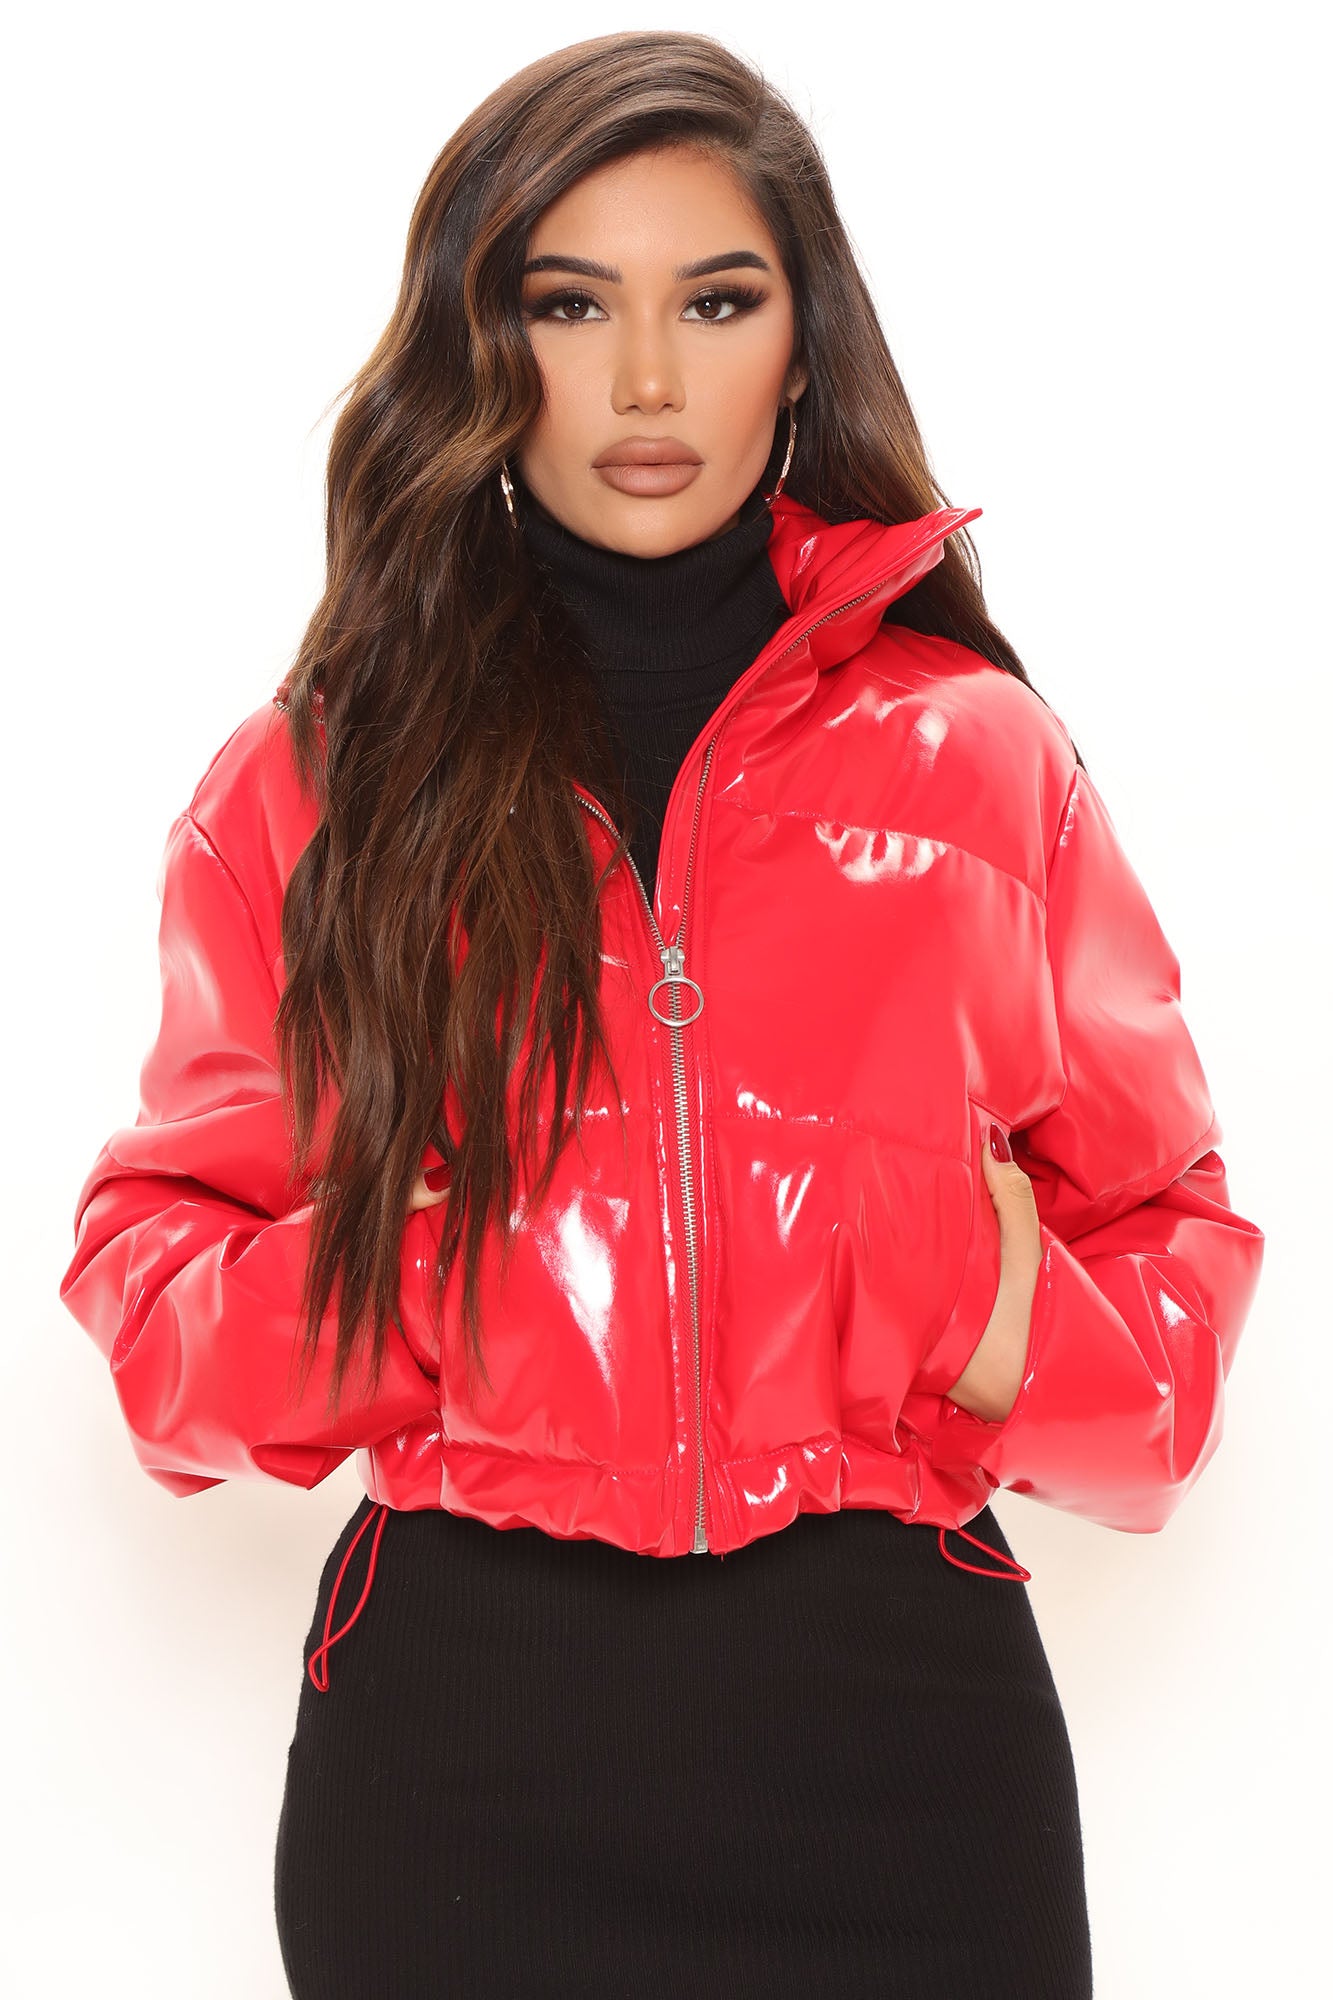 Women's Vixen Faux Leather Puffer Jacket in Red Size Small by Fashion Nova